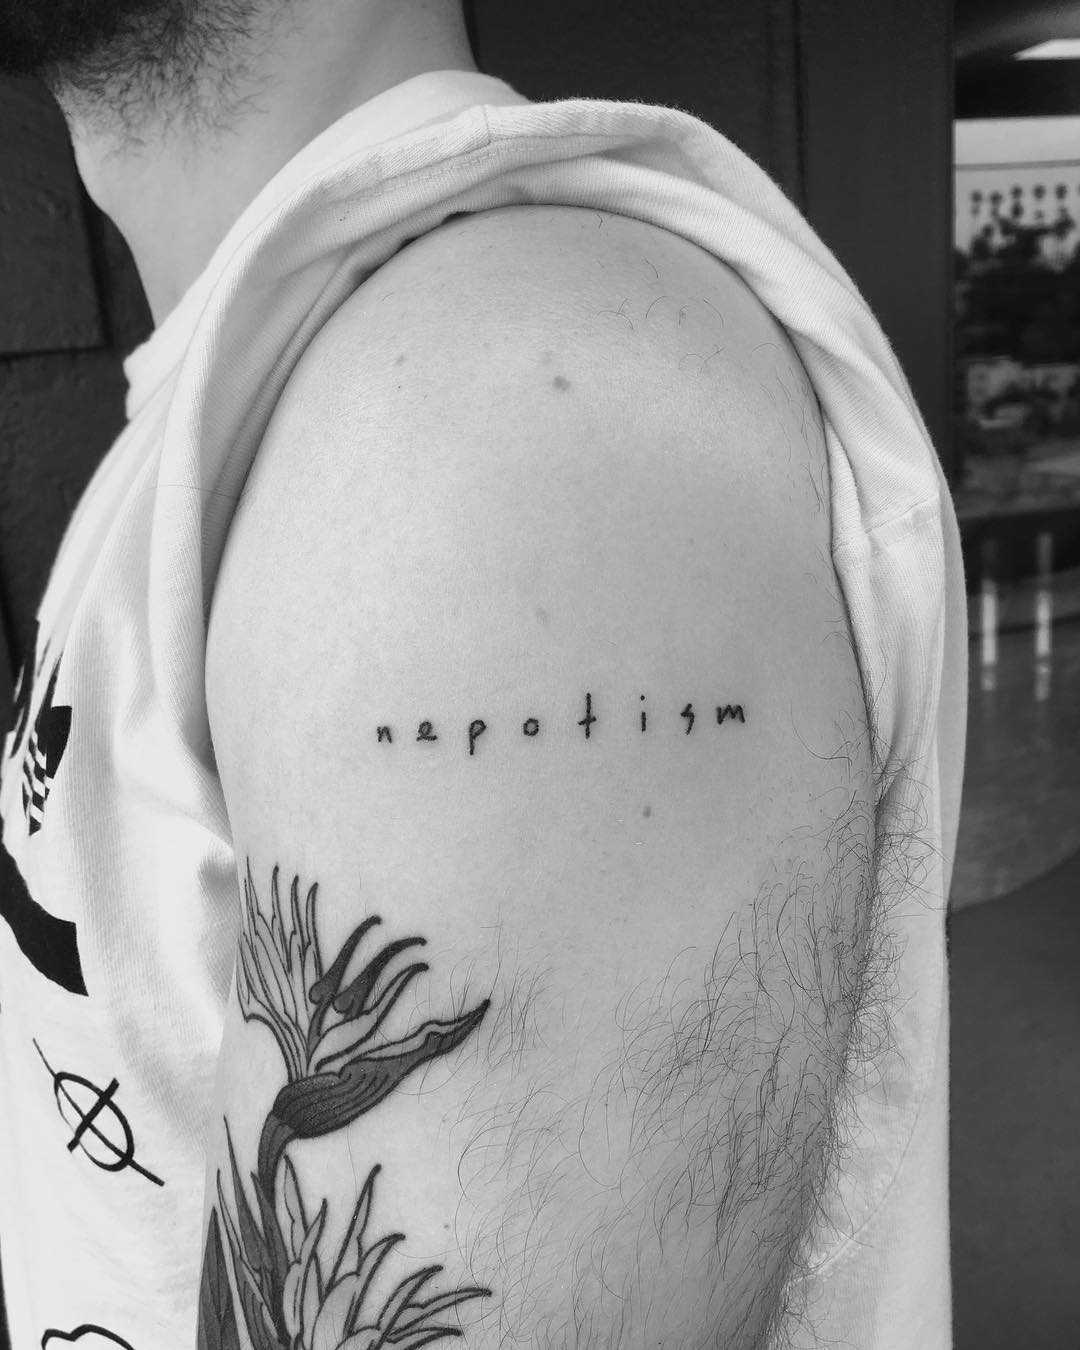 Nepotism tattoo by Robbie Ra Moore